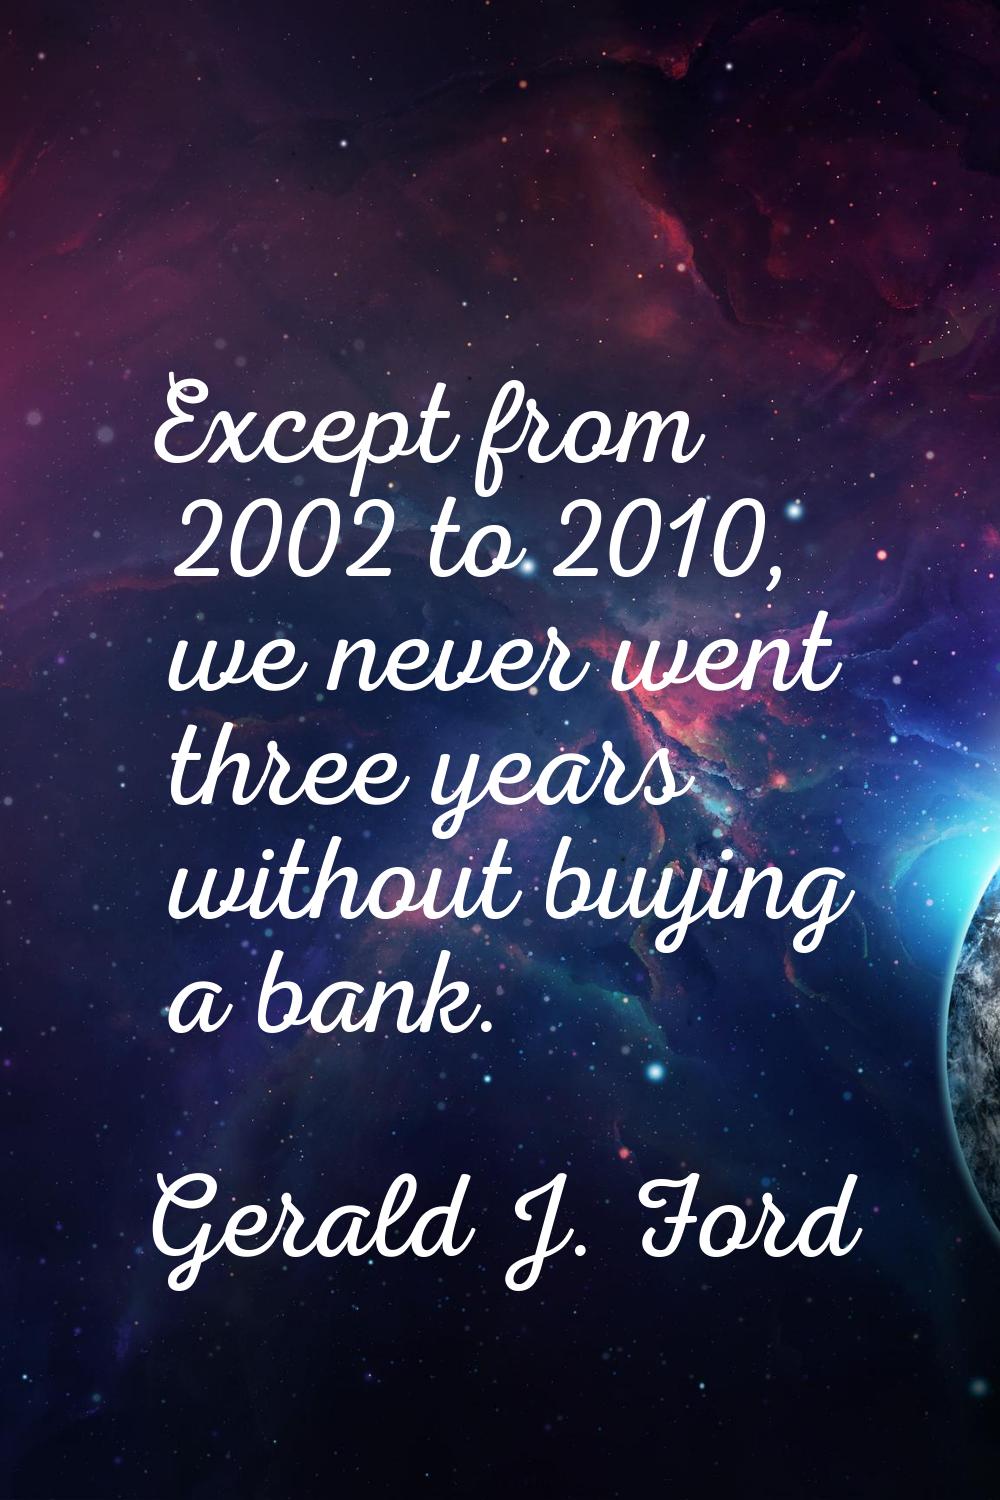 Except from 2002 to 2010, we never went three years without buying a bank.